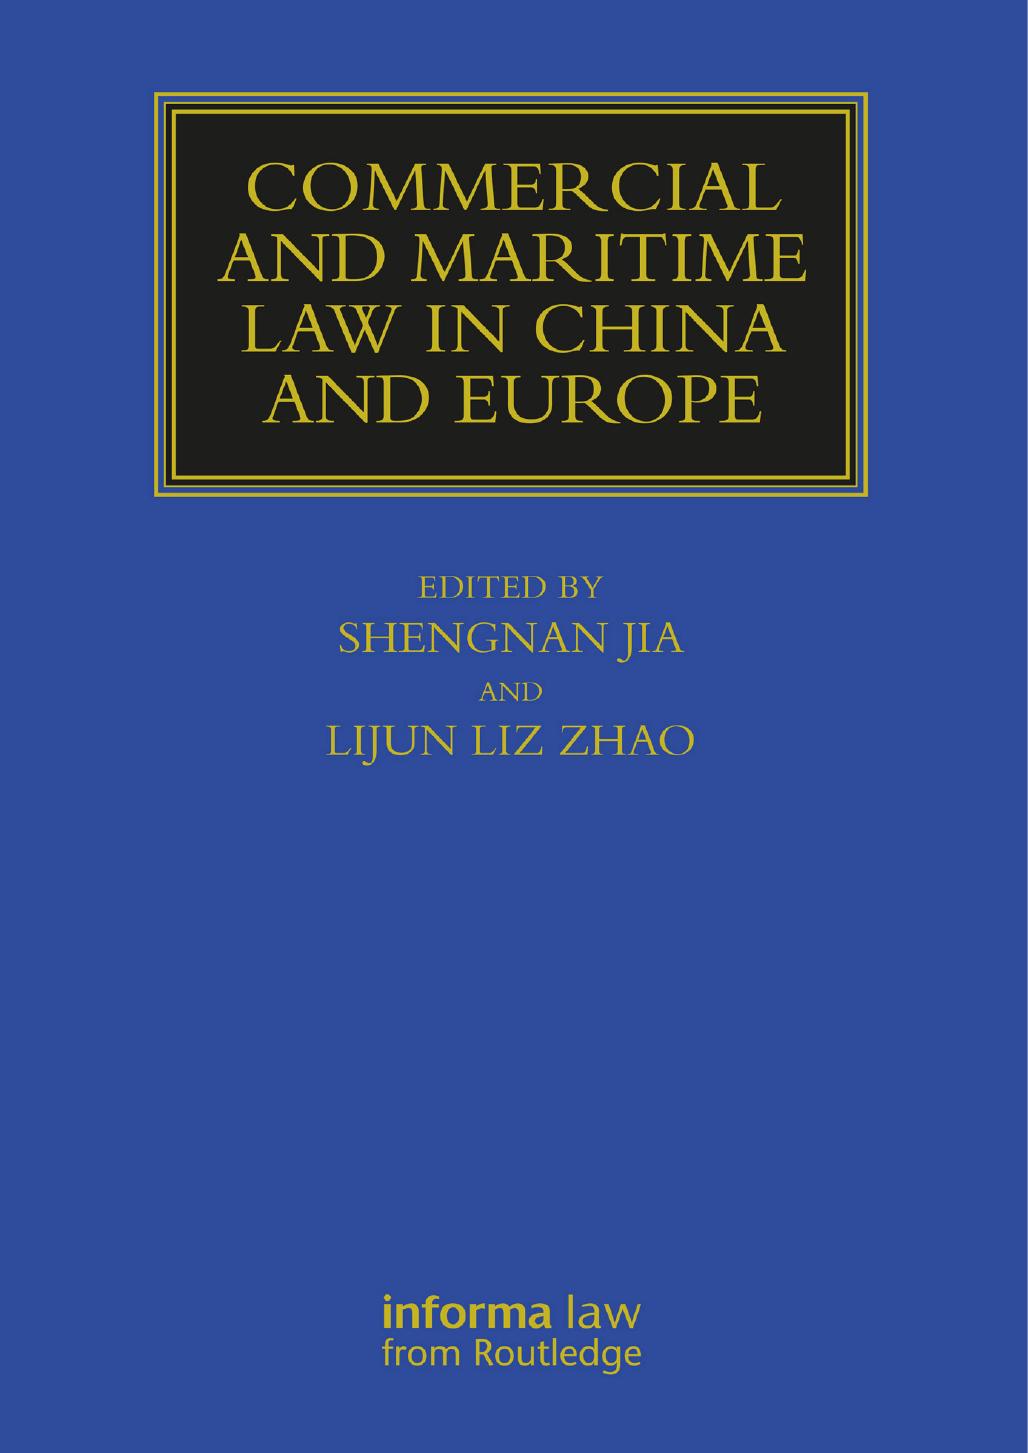 Commercial and Maritime Law in China and Europe by Shengnan Jia Lijun Liz Zhao